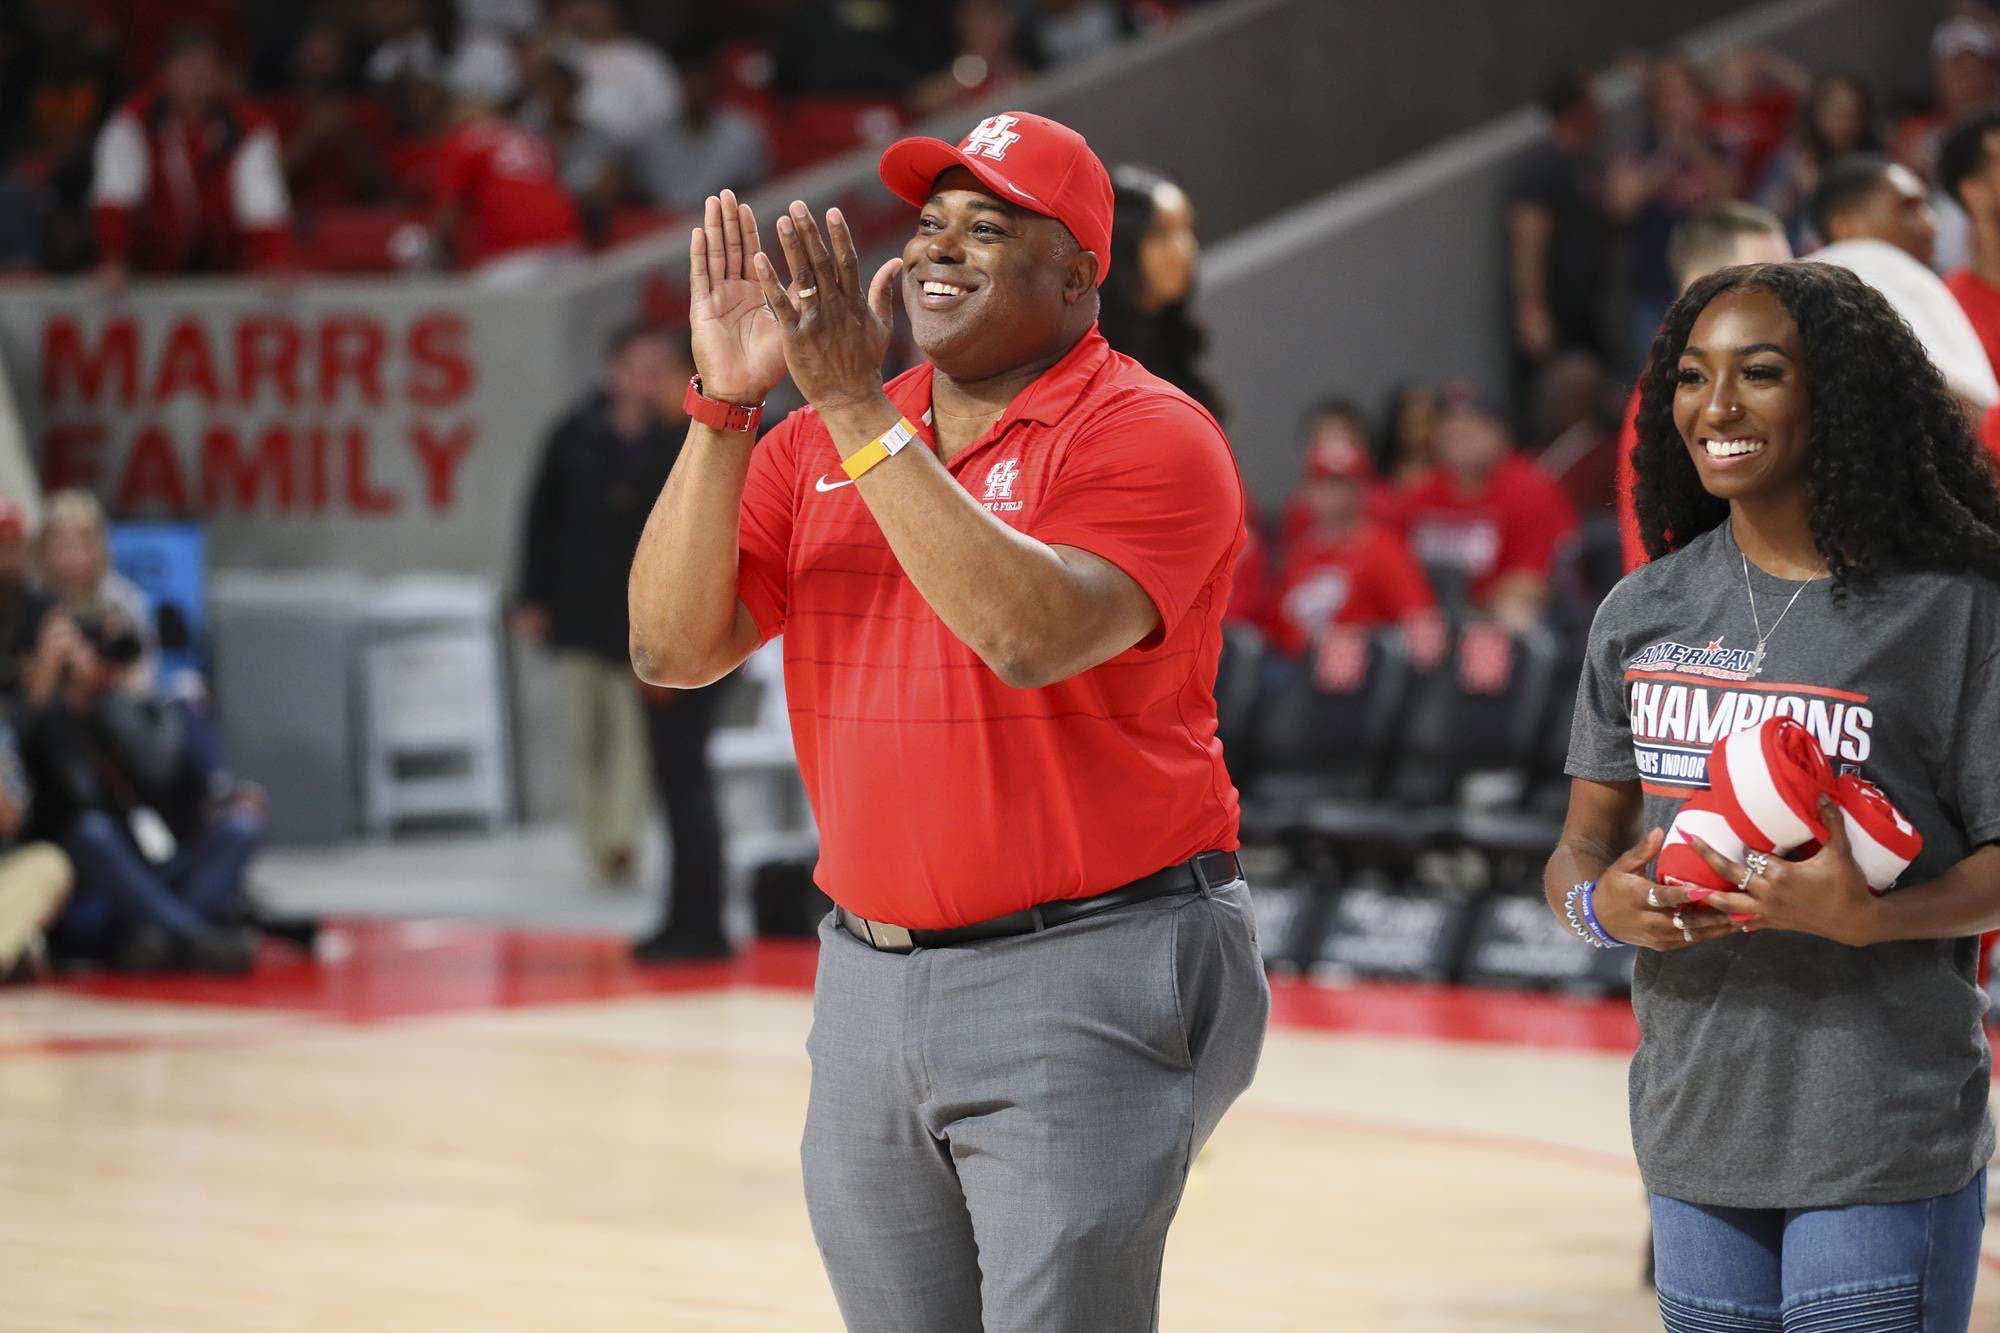 Leroy Burrell elevated the UH track and field program to another level during his 23 years as head coach. | Courtesy of UH athletics